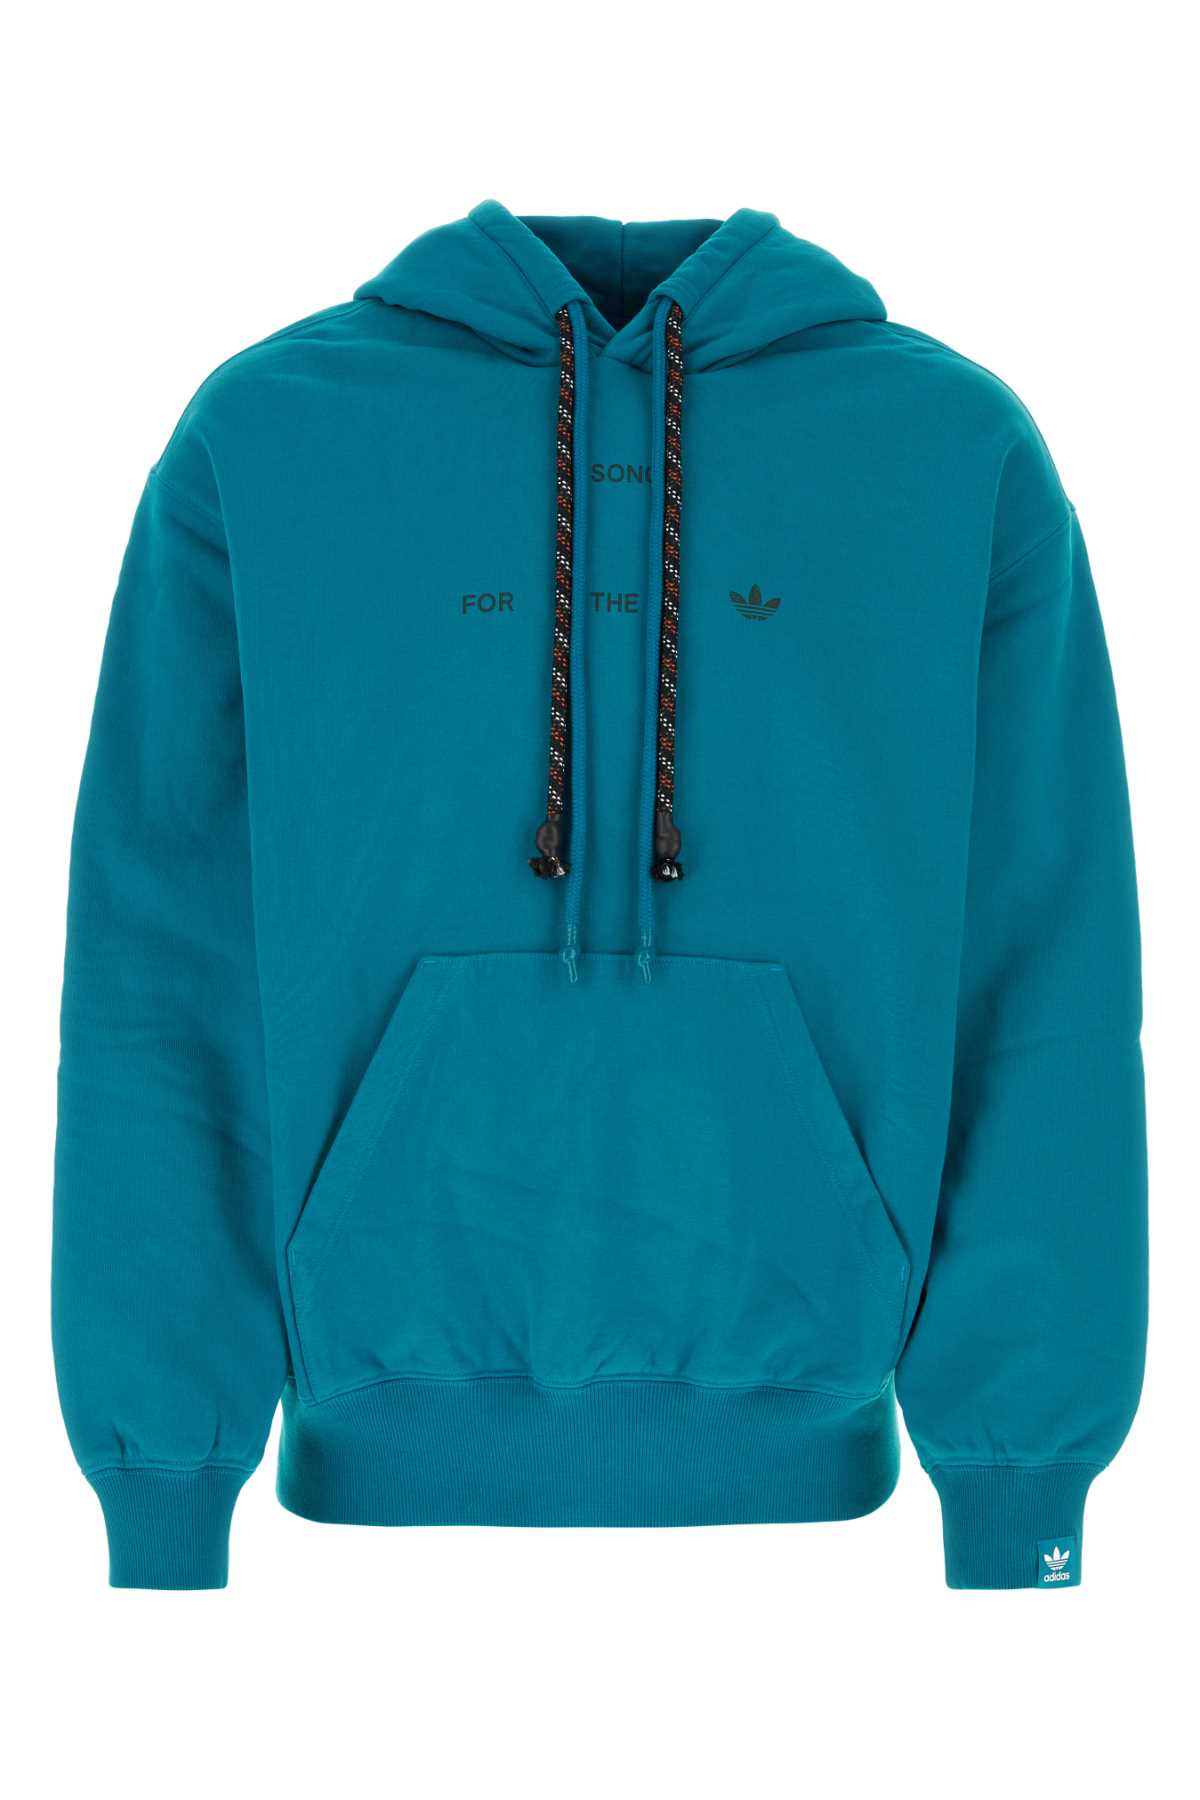 Shop Adidas Originals Turquoise Cotton Adidas X Song For The Mute Sweatshirt In Activeteal